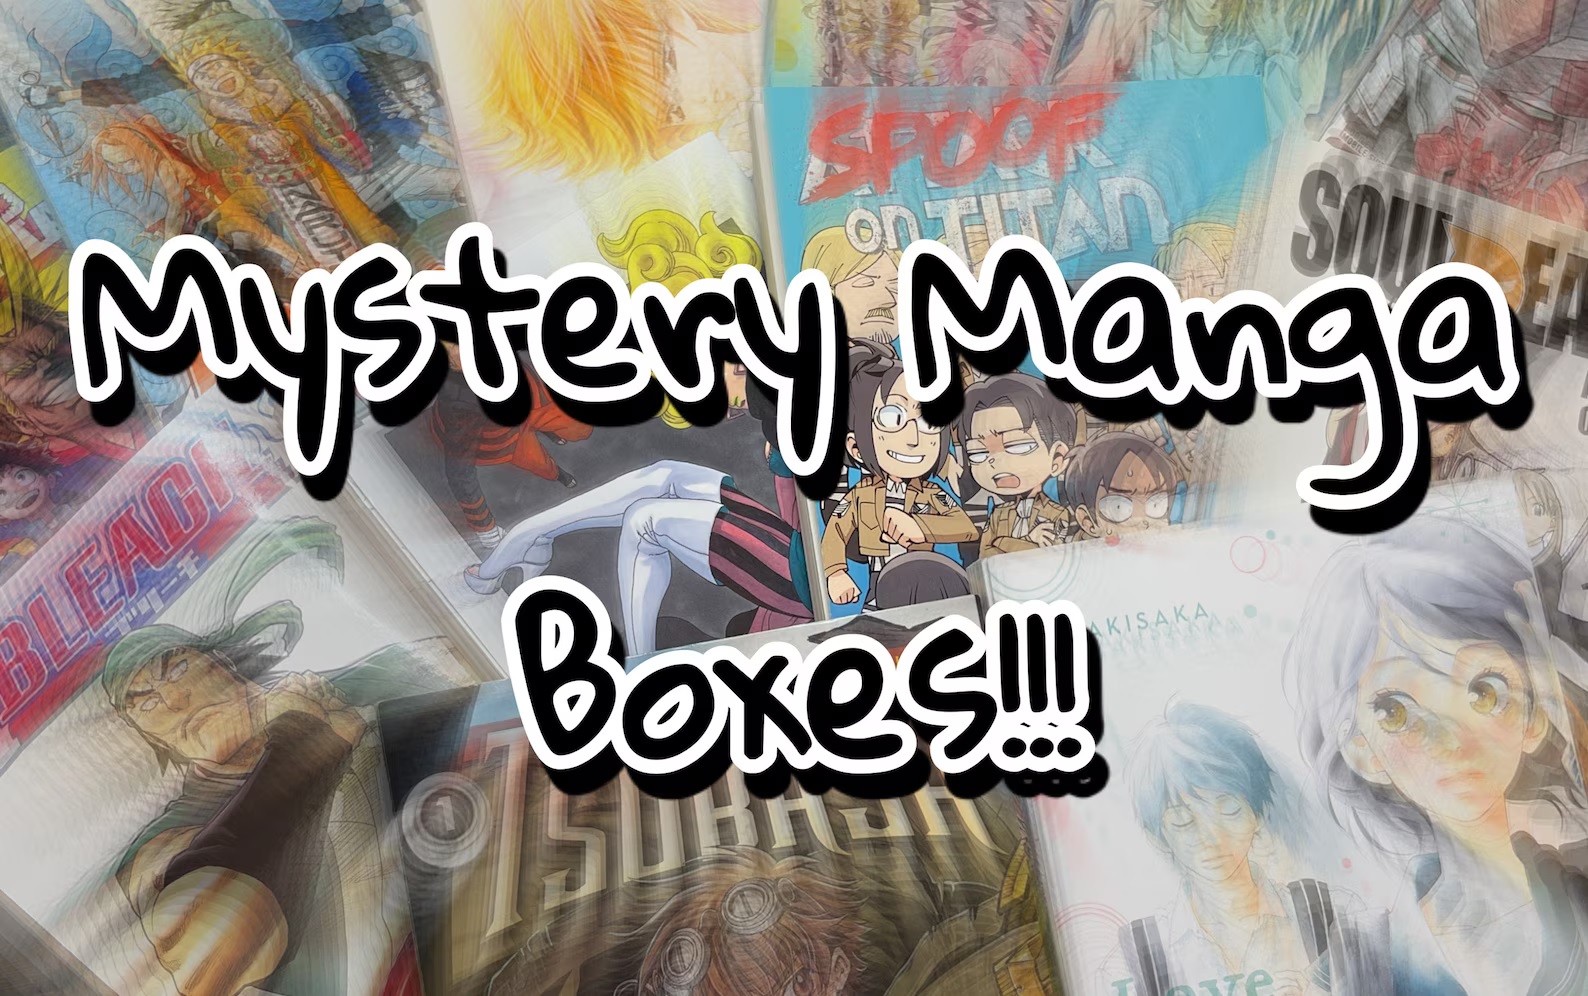 An image of several blurry manga covers overlaid with the words "mystery manga boxes!!!"